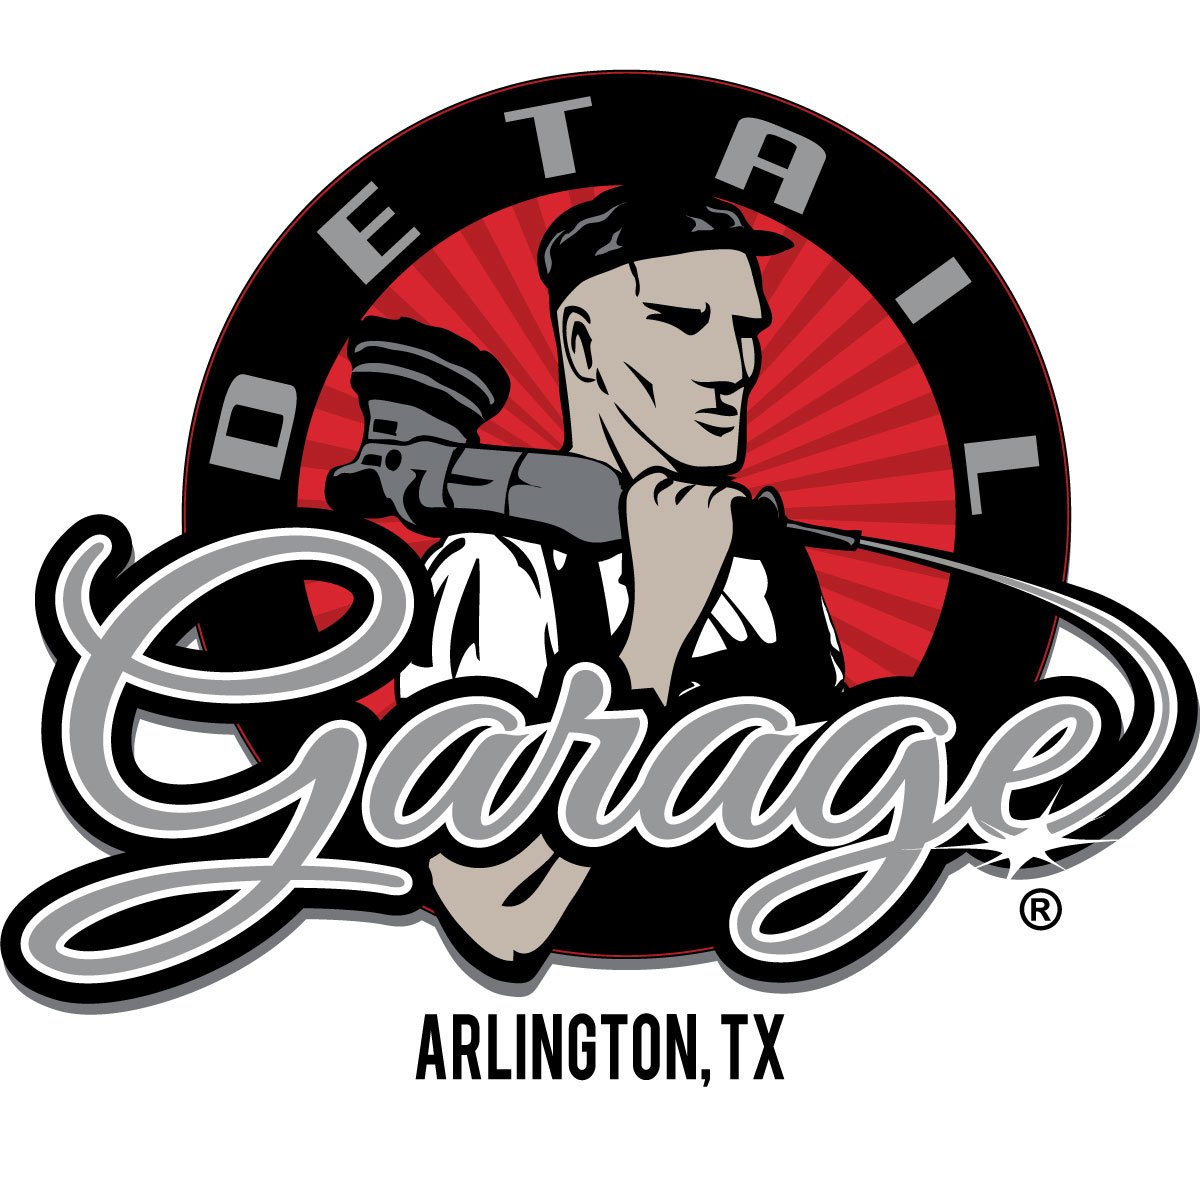 Destination for auto detailing supplies, equipment, accessories, & training. Offering the industry leading brands @ChemicalGuys, #TORQ, and #CycloneDirtTrap!